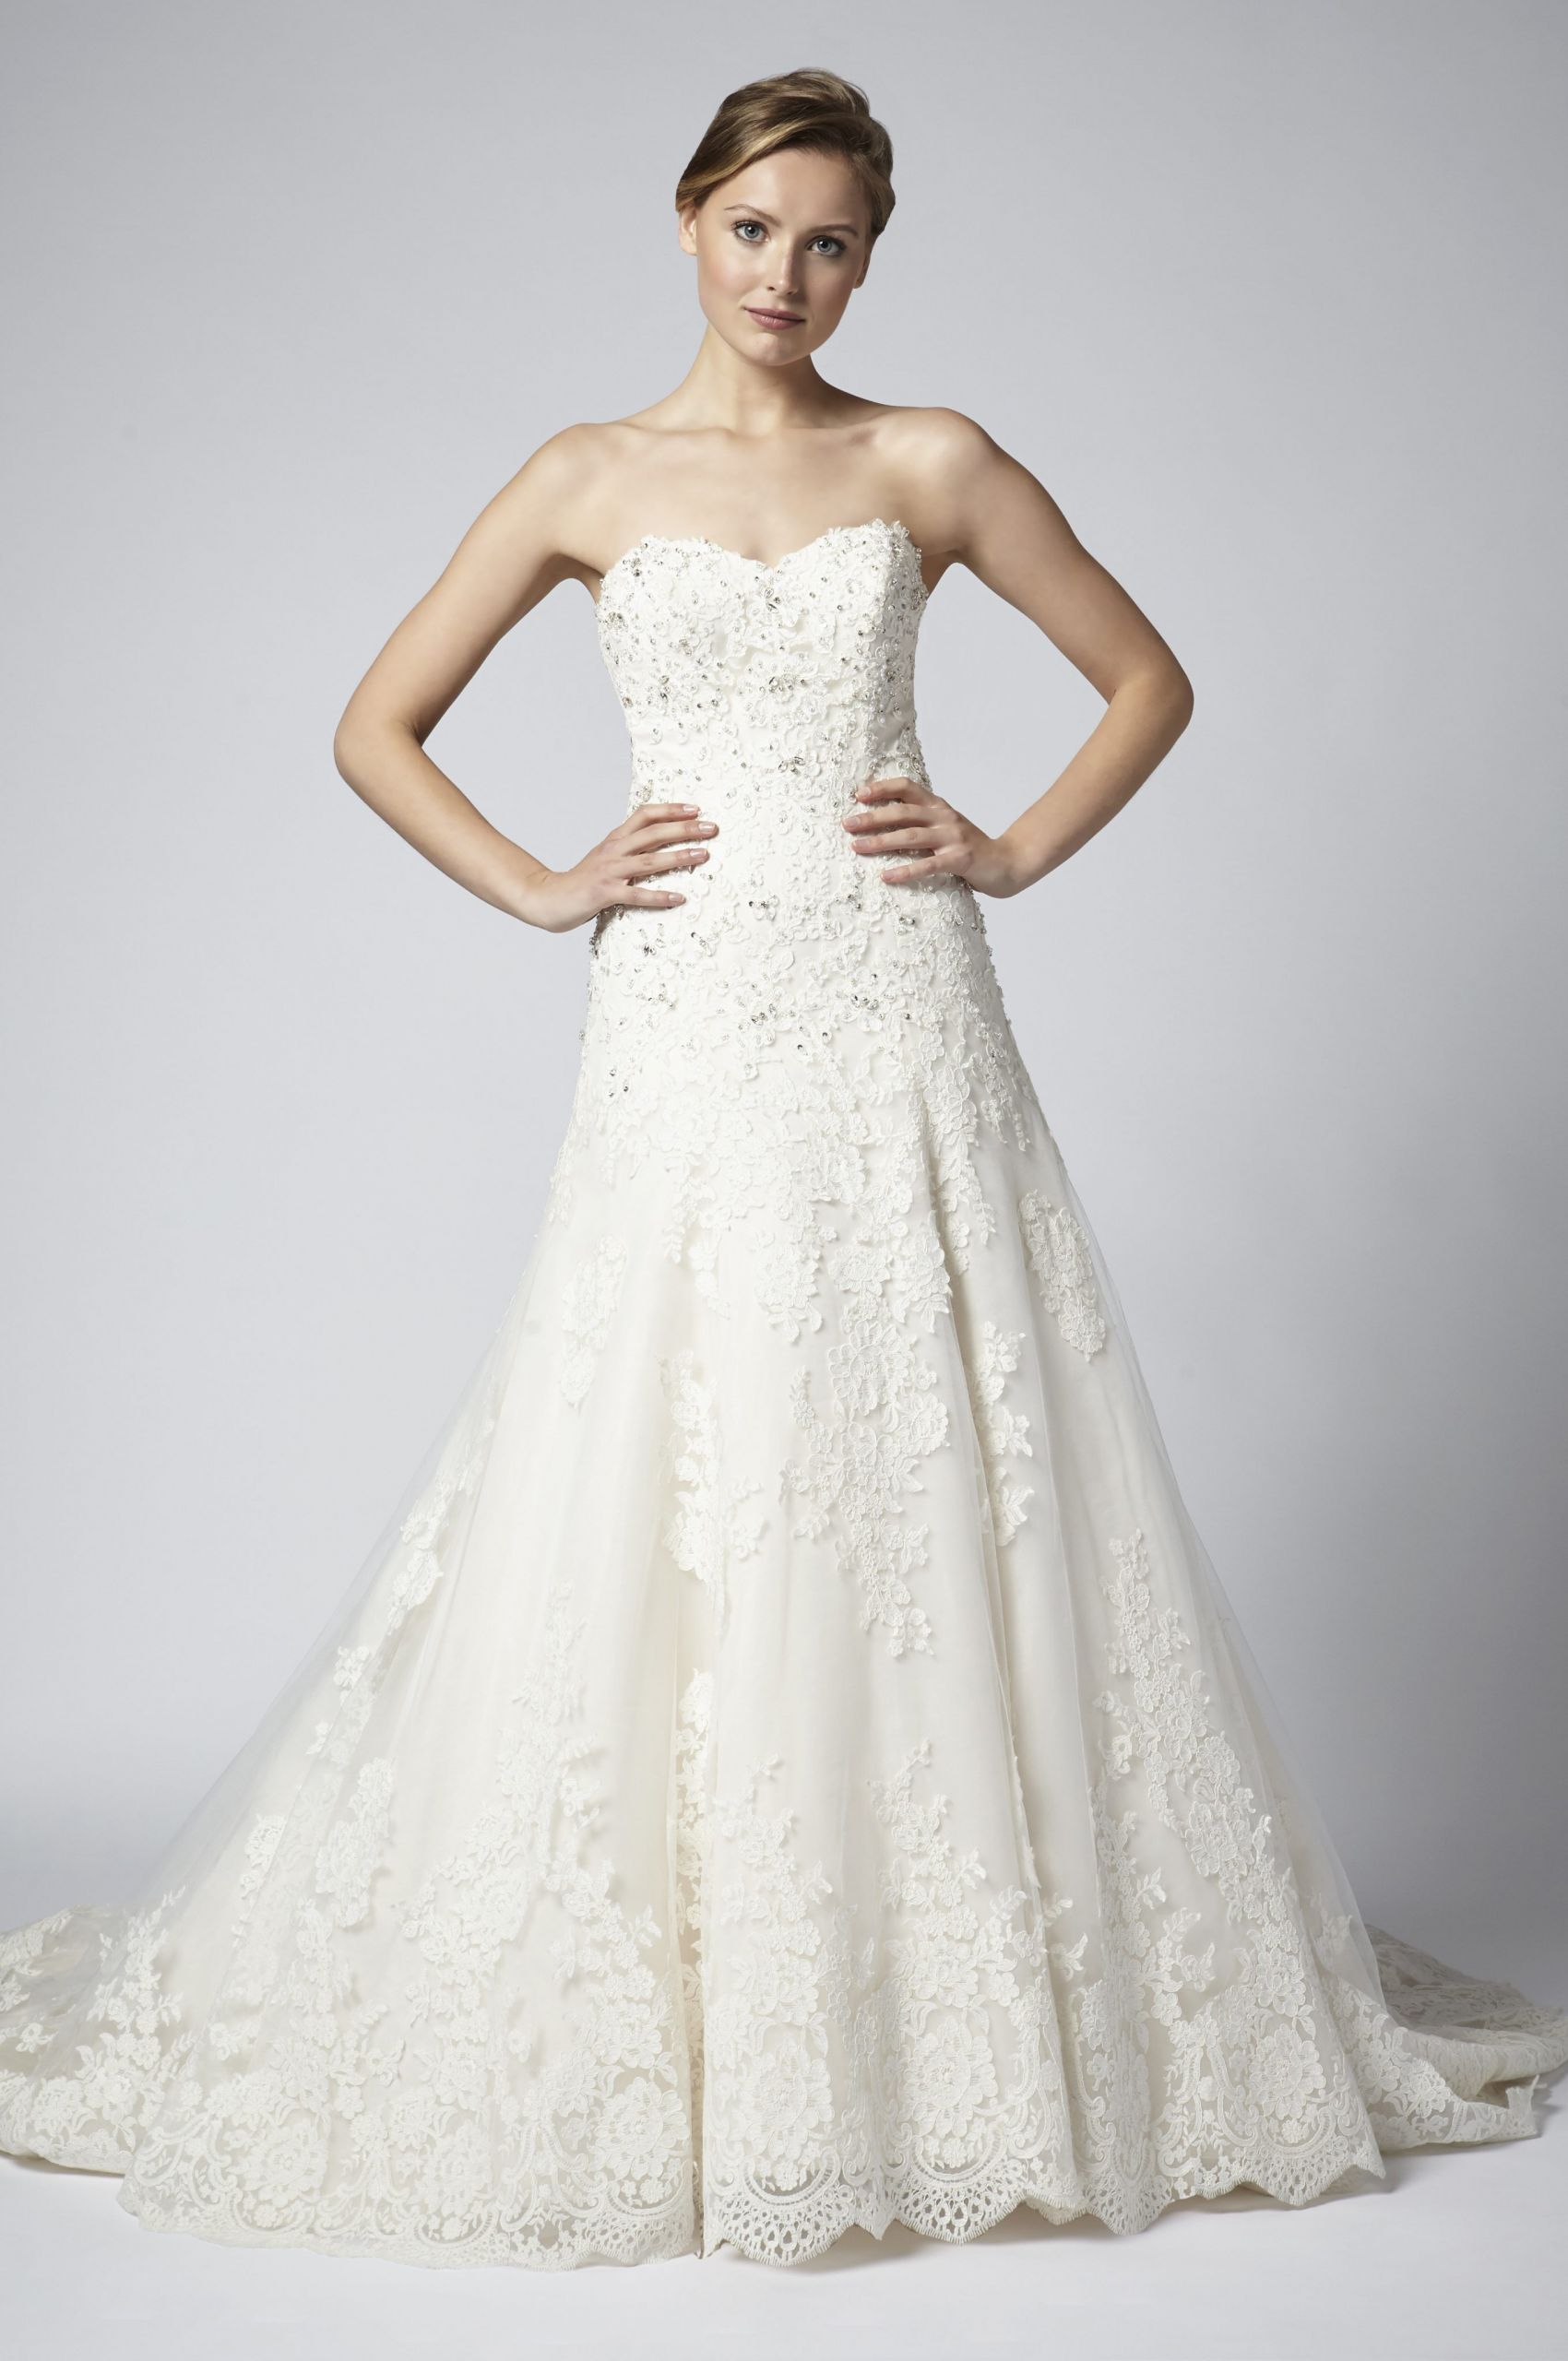 Strapless Wedding Gown
 Strapless Lace Beaded A line Wedding Dress